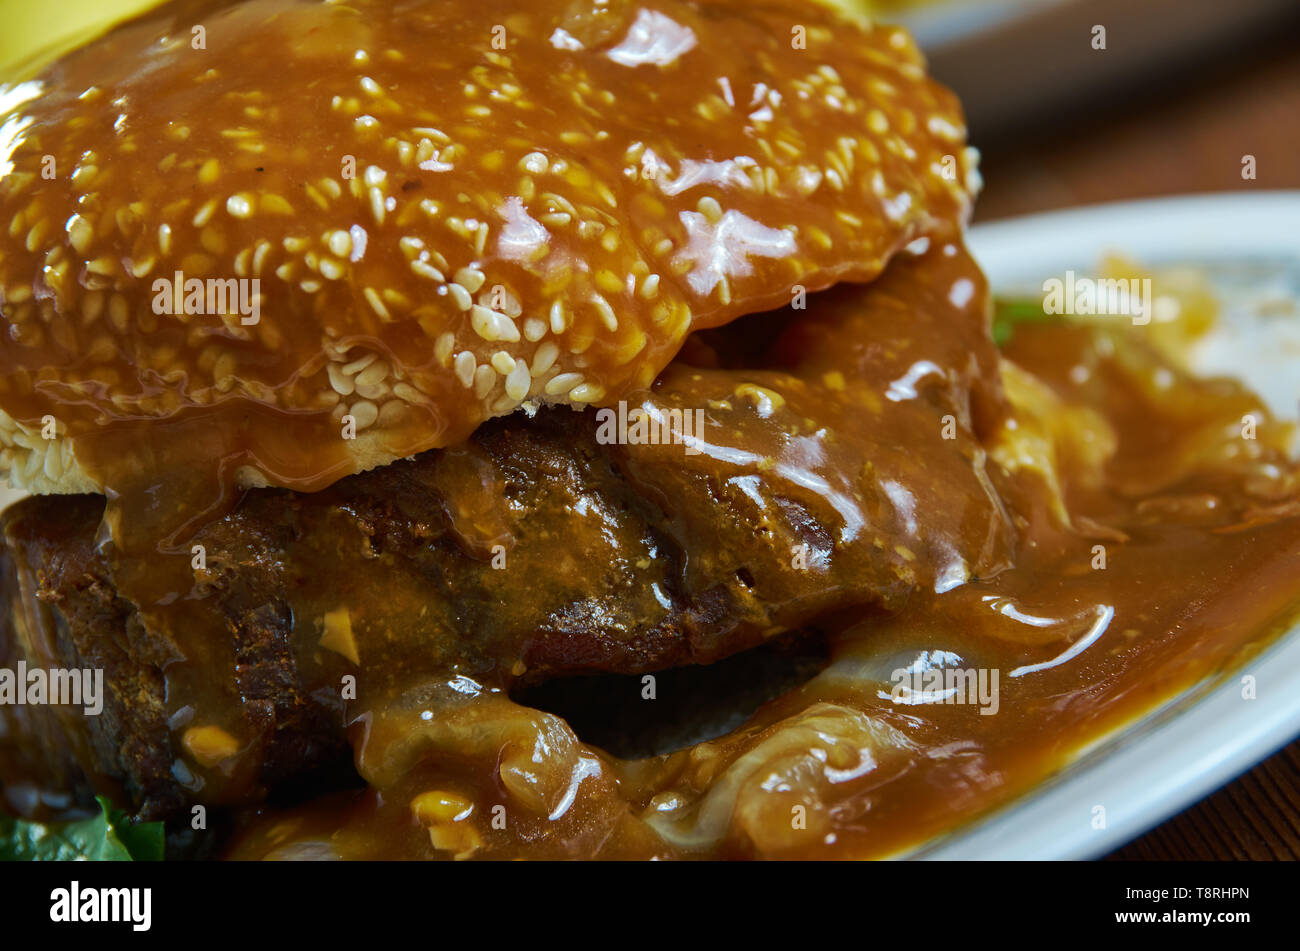 Bofsandwich Danish Steak Sandwich Hamburger Cooked Ground Beef Patty Placed Inside A Sliced Bread Roll Stock Photo Alamy